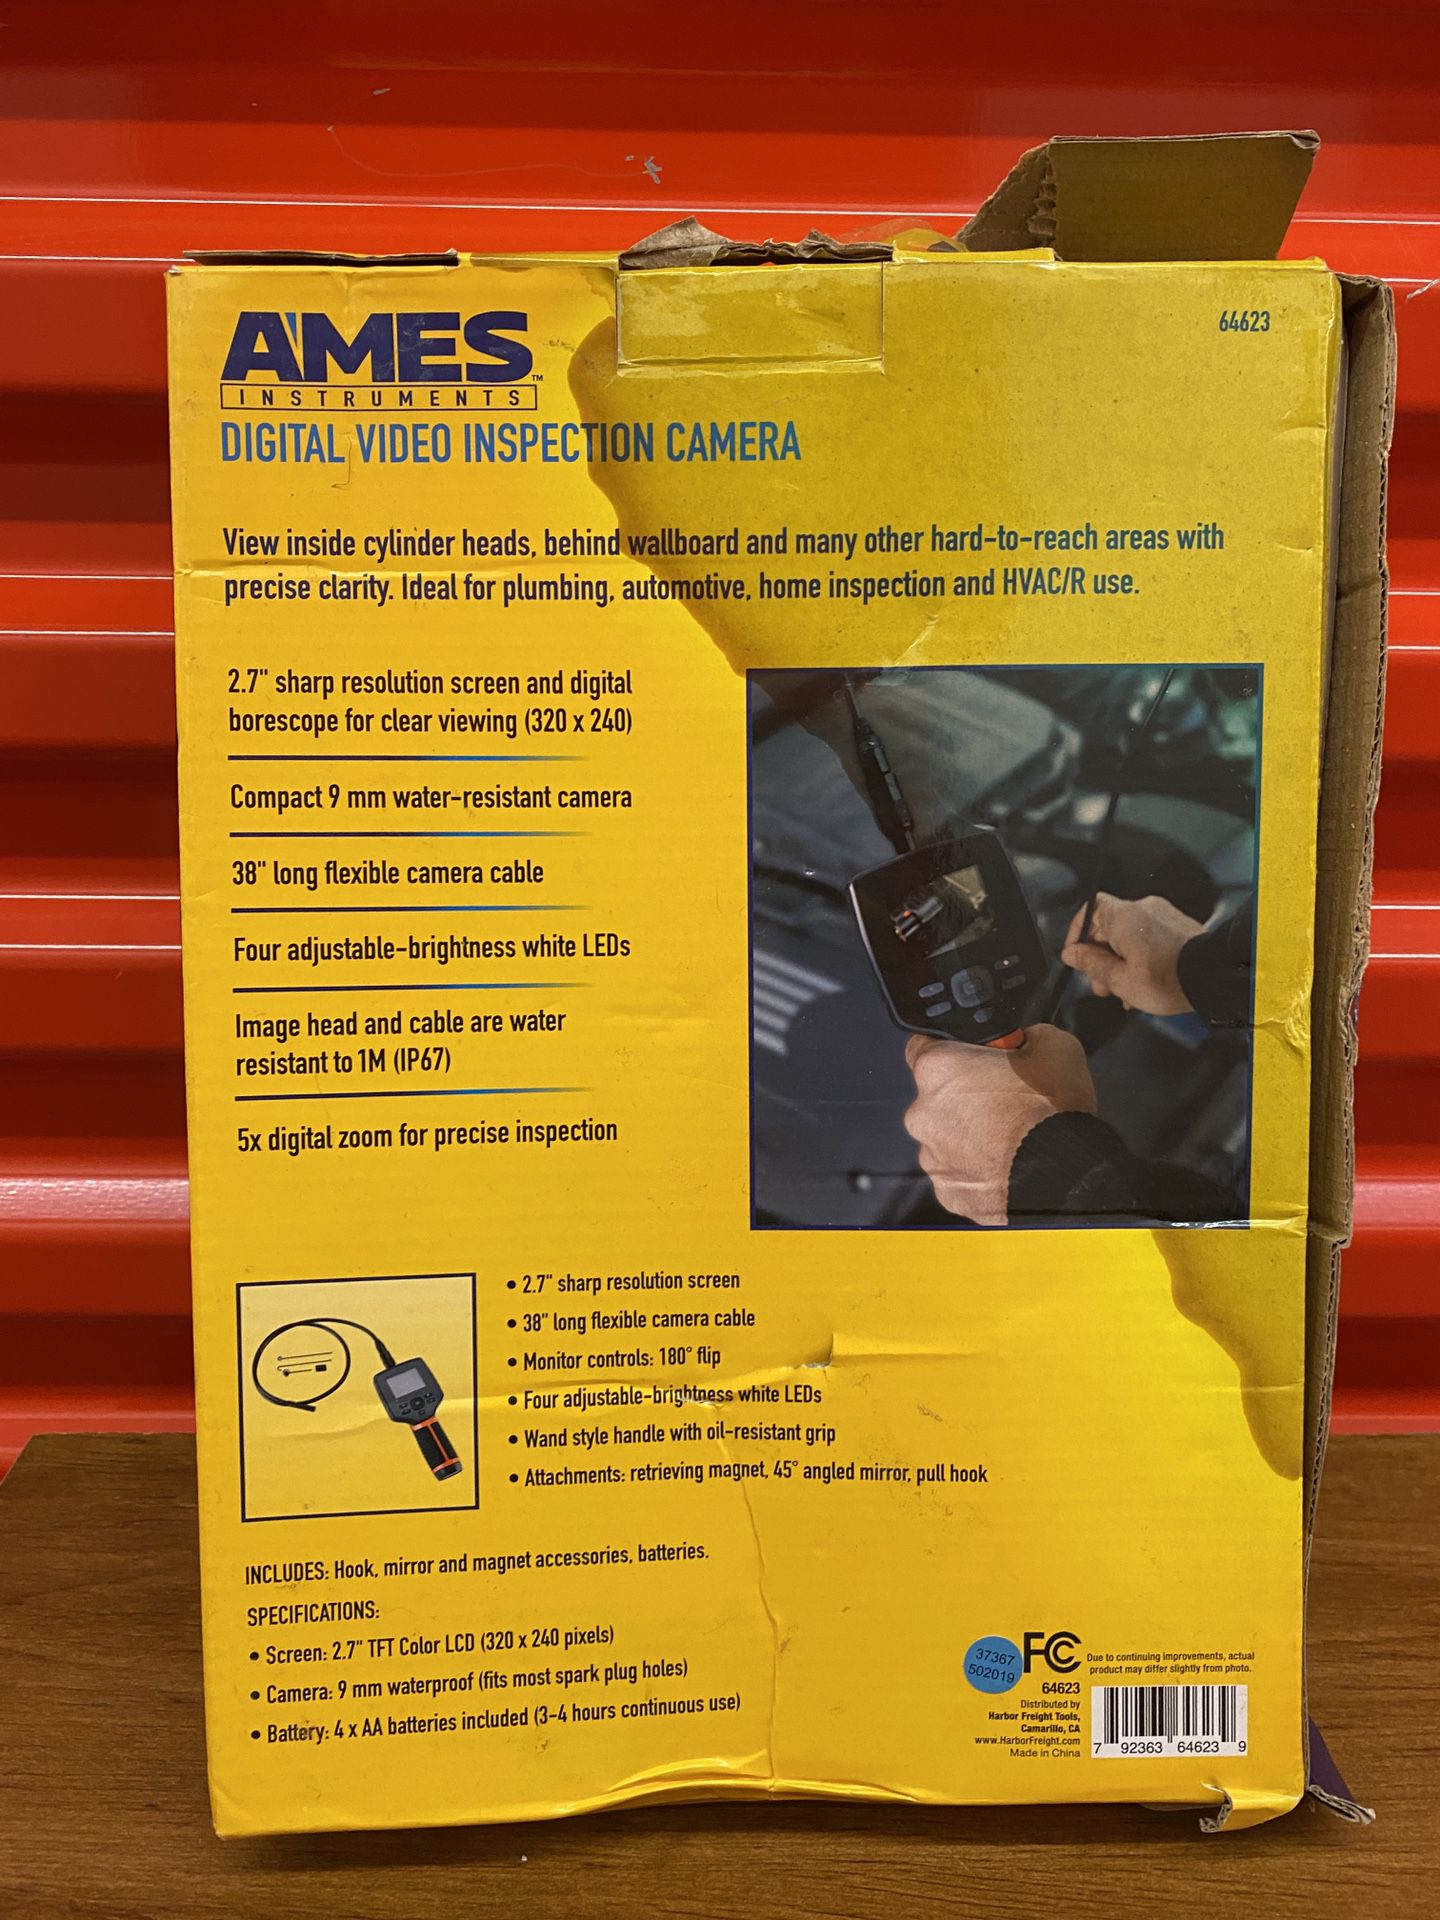 Ames Digital Video & Inspection Camera For $95